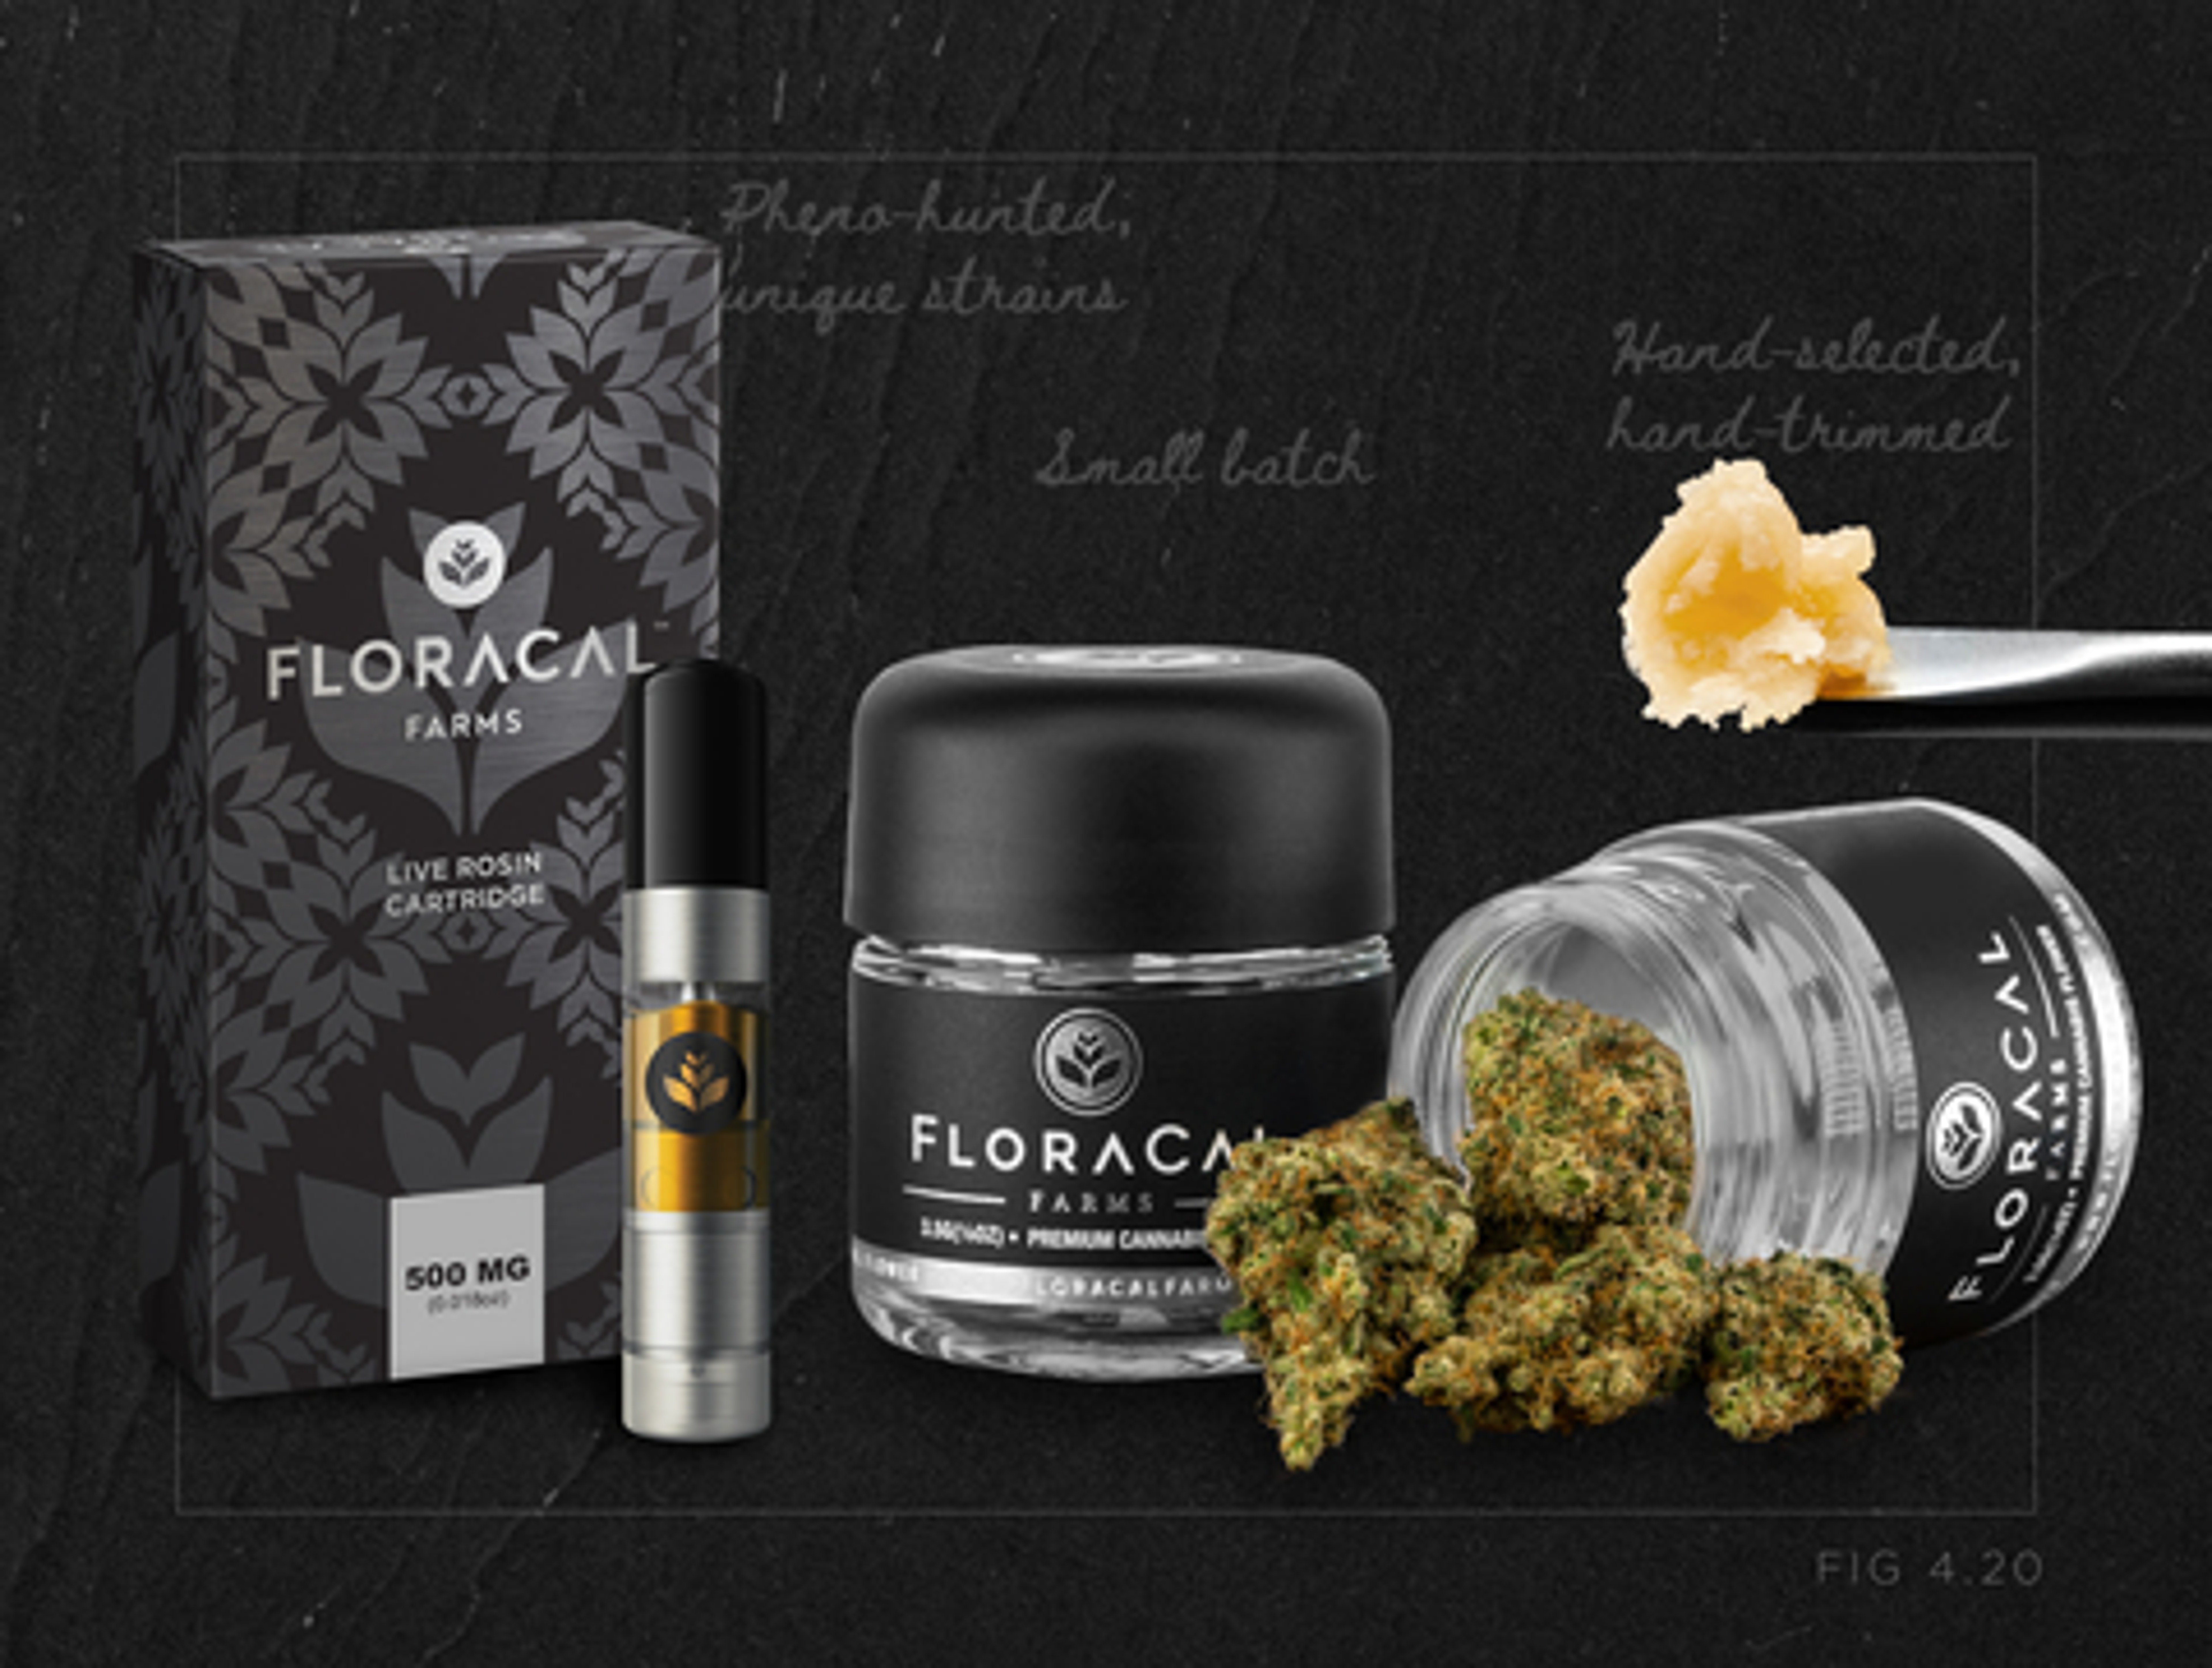 Cresco Labs Brings Its Cannabis Brand FloraCal Farms To Illinois